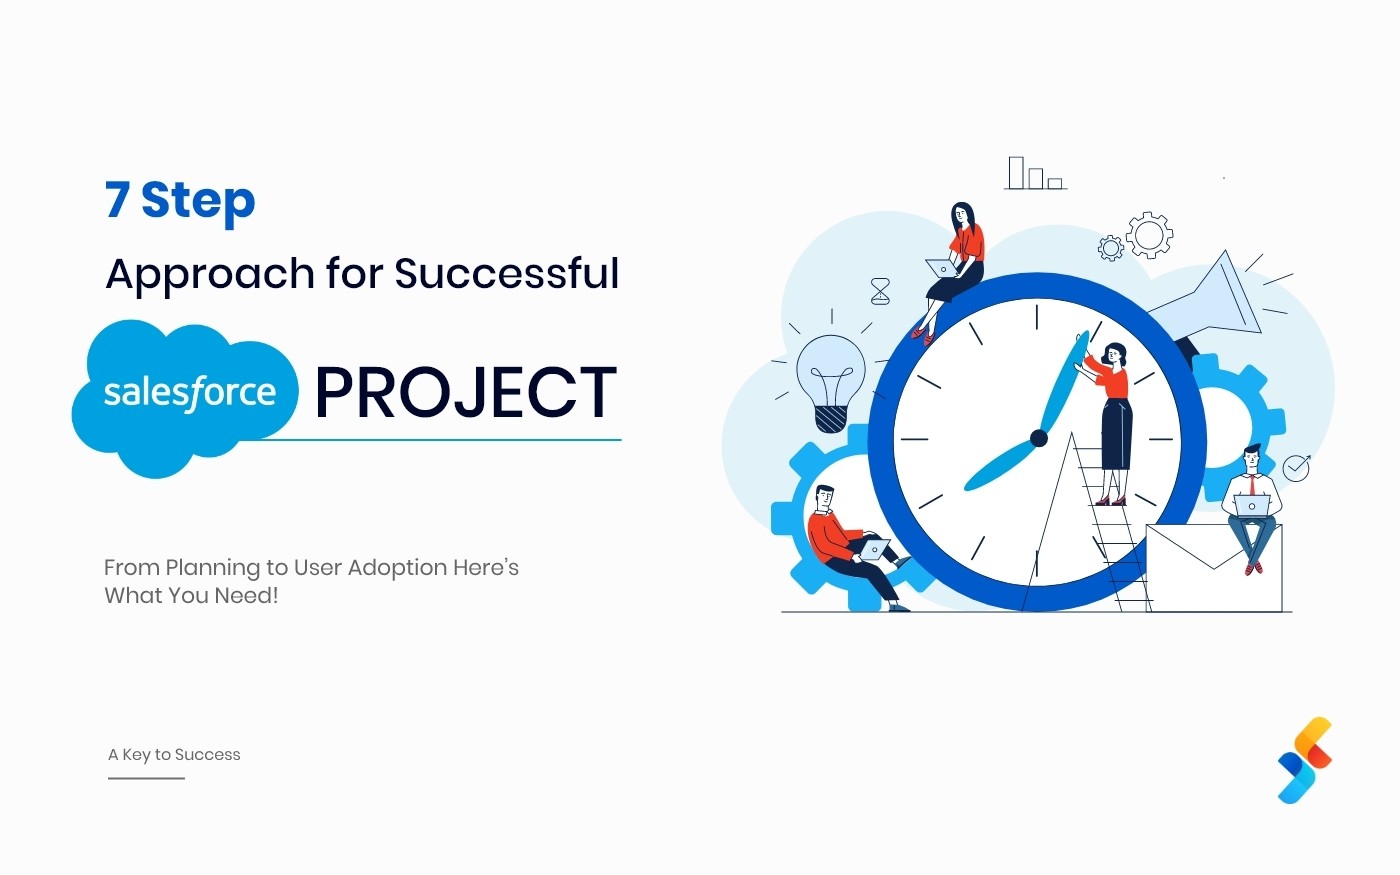 Seven Important Steps to a Successful Salesforce Project